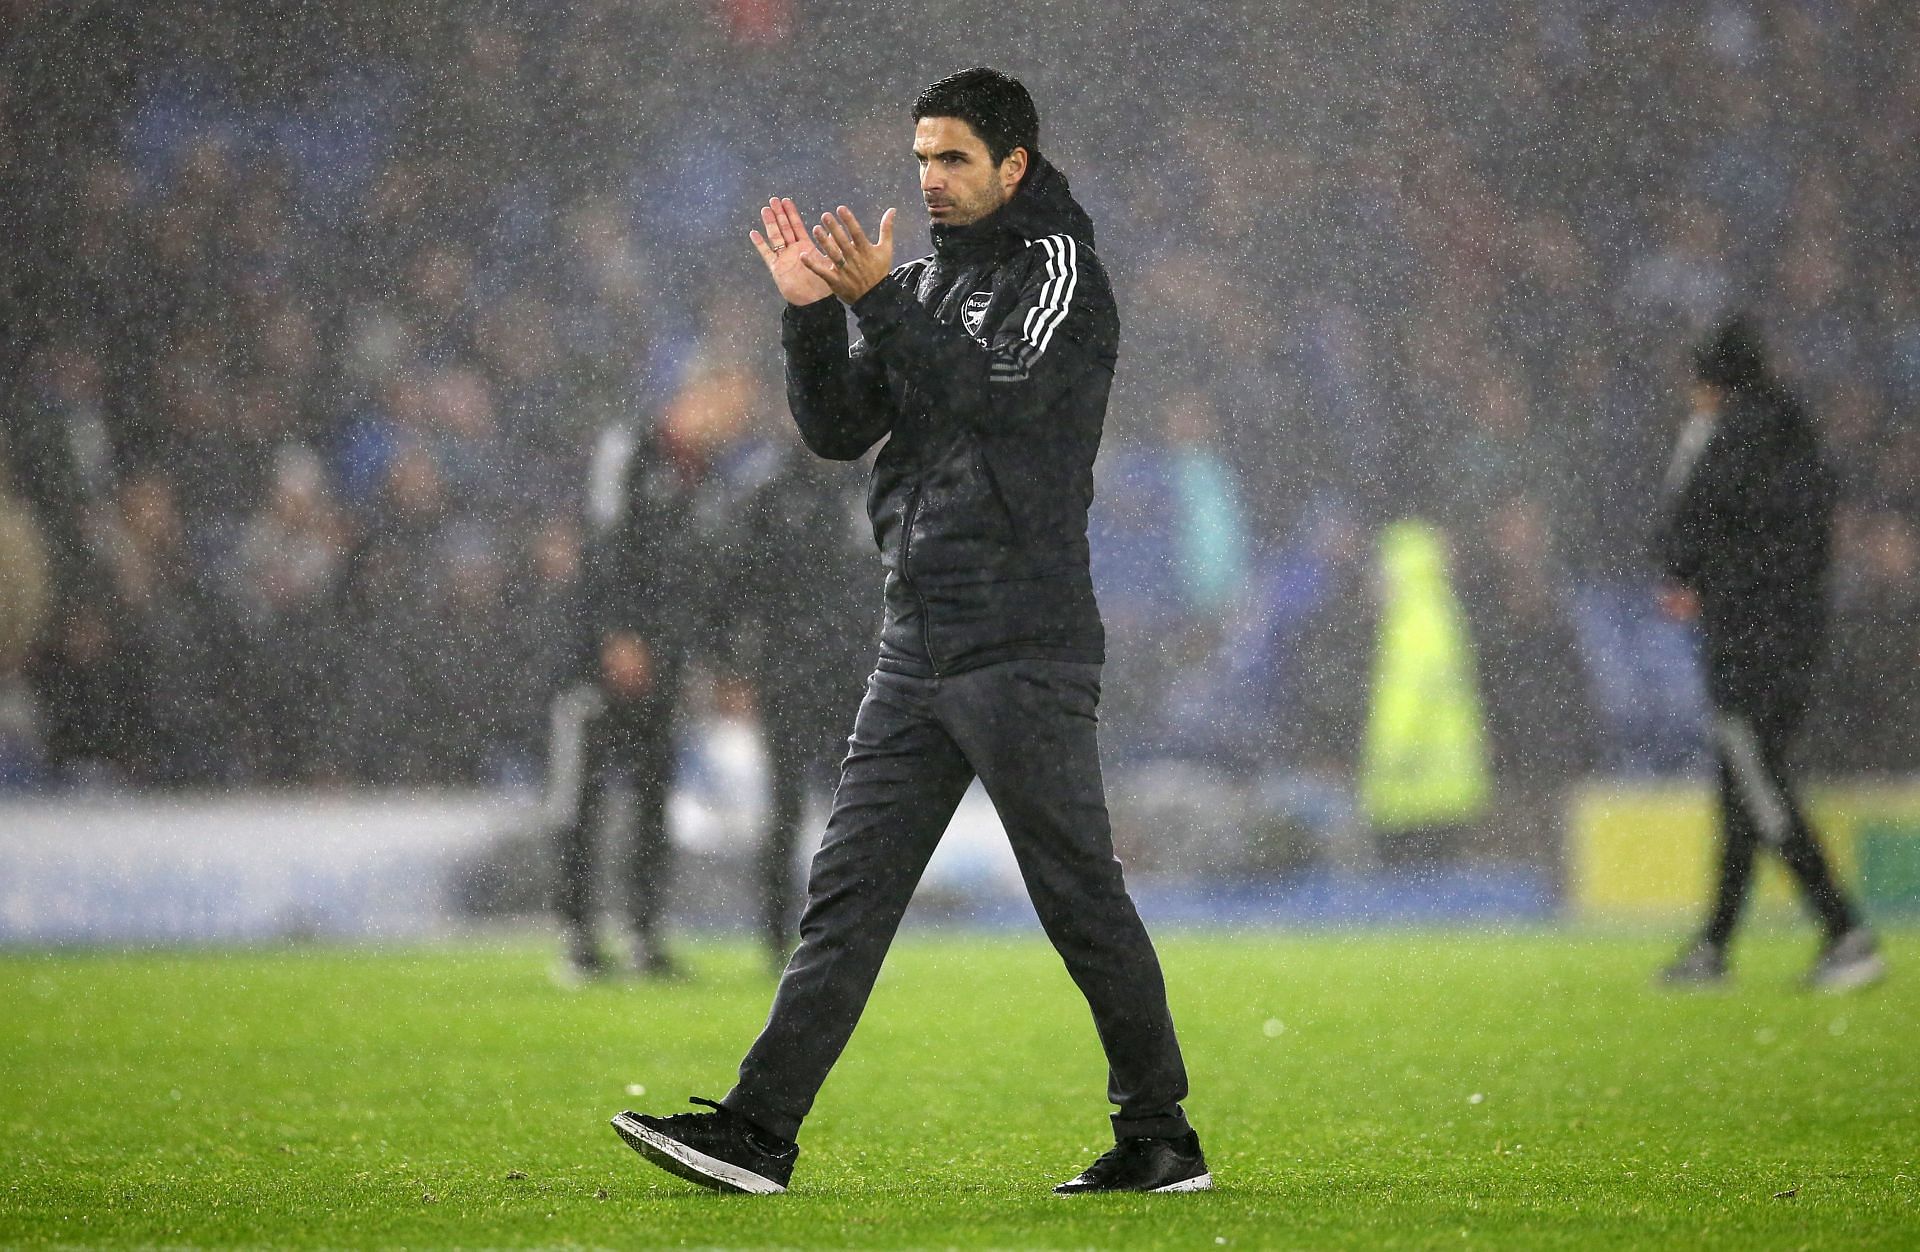 Arsenal manager Mikel Arteta is looking to extend his unbeaten run in the Premier League.